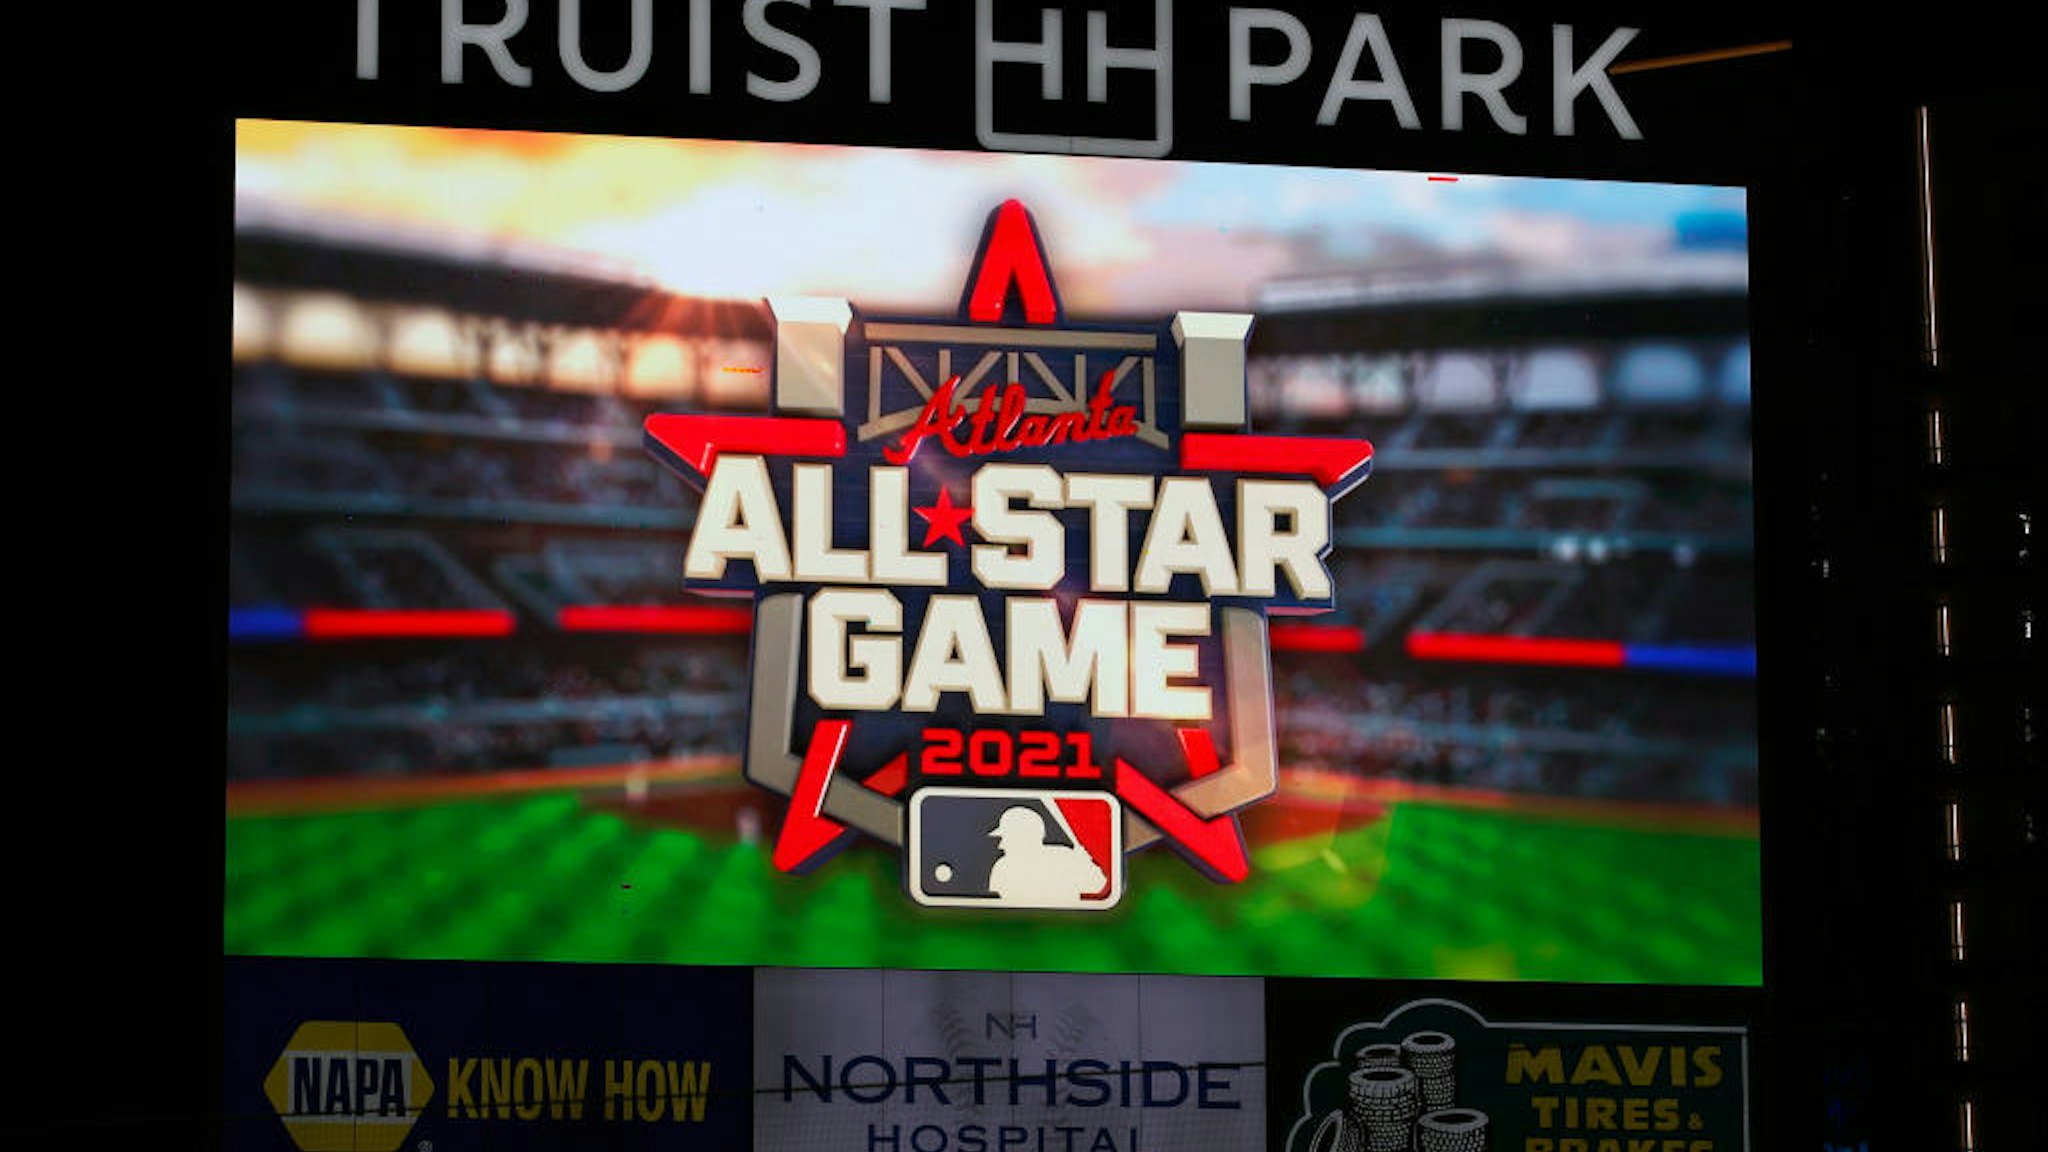 ATLANTA, GA - SEPTEMBER 24: The 2021 All Star Game Logo is displayed on the screen prior to the game between the Miami Marlins and Atlanta Braves at Truist Park on September 24, 2020 in Atlanta, Georgia. (Photo by Todd Kirkland/Getty Images) *** Local Caption ***